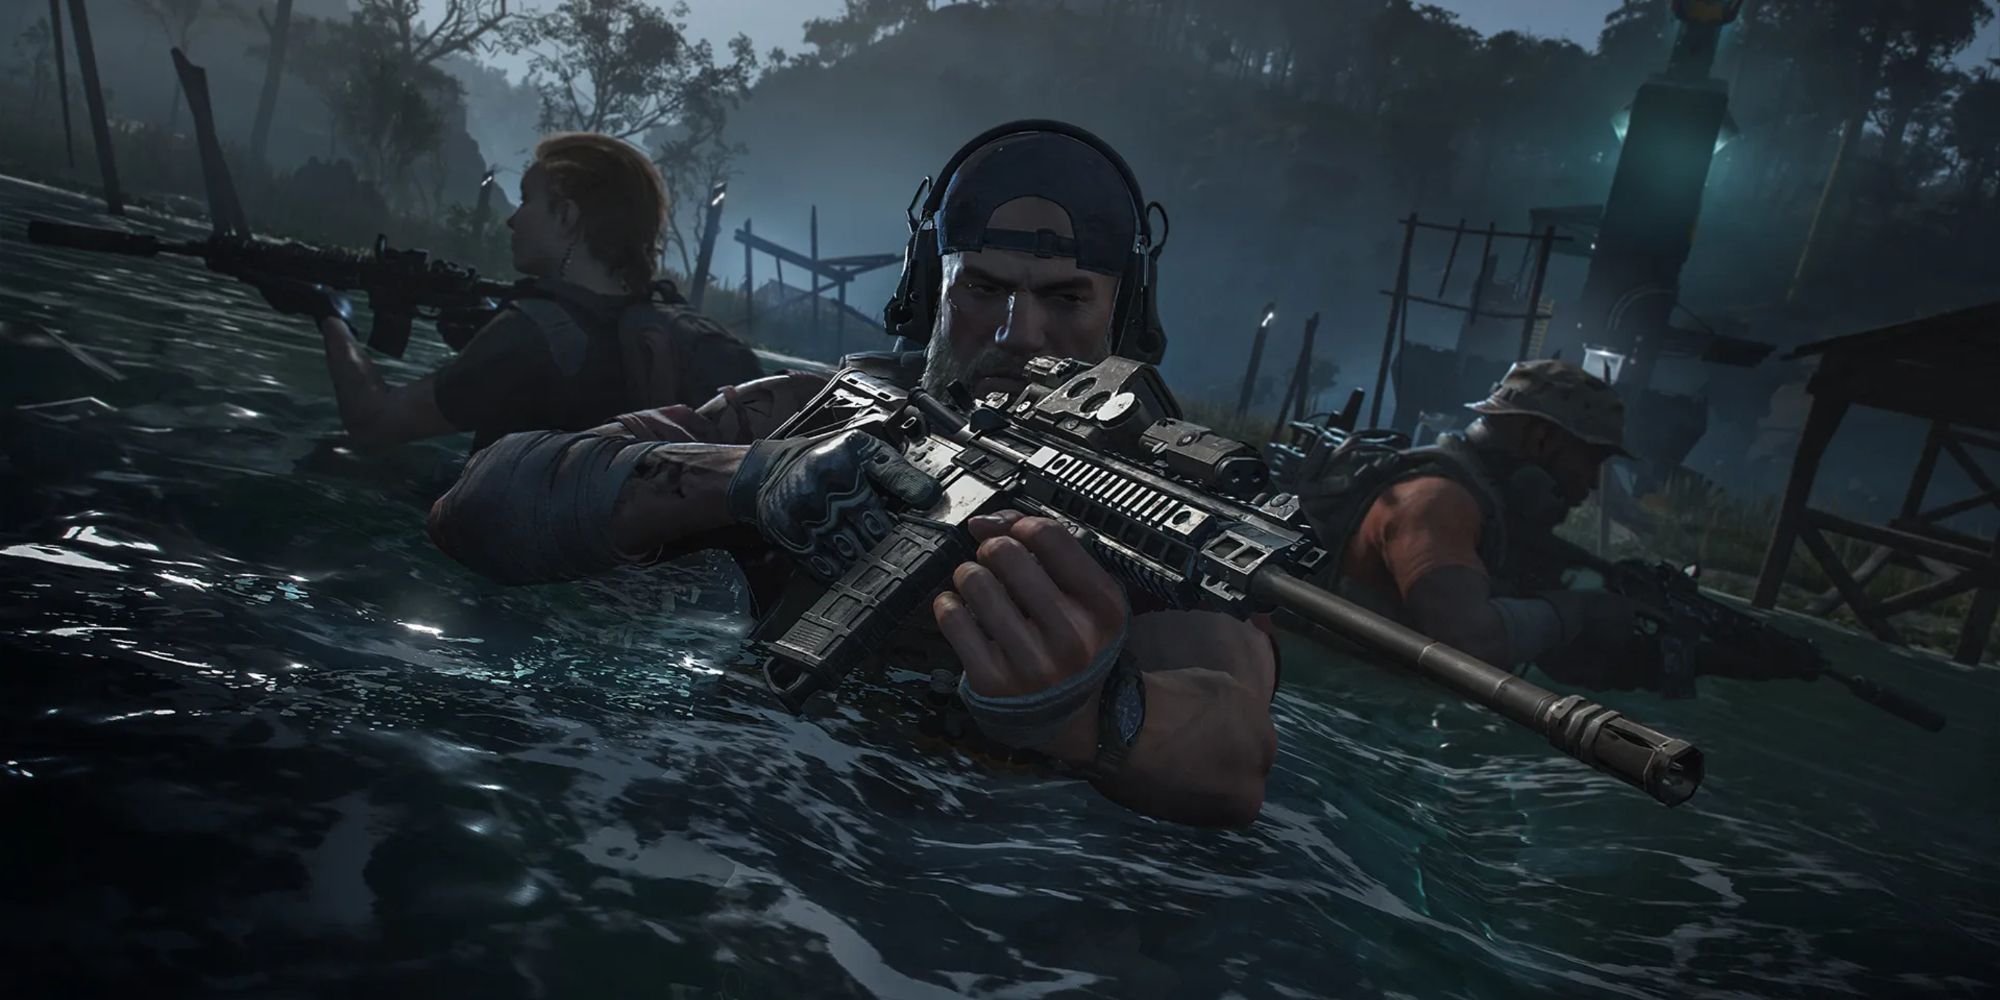 Squad aiming their weapons while wading through water in Ghost Recon Breakpoint